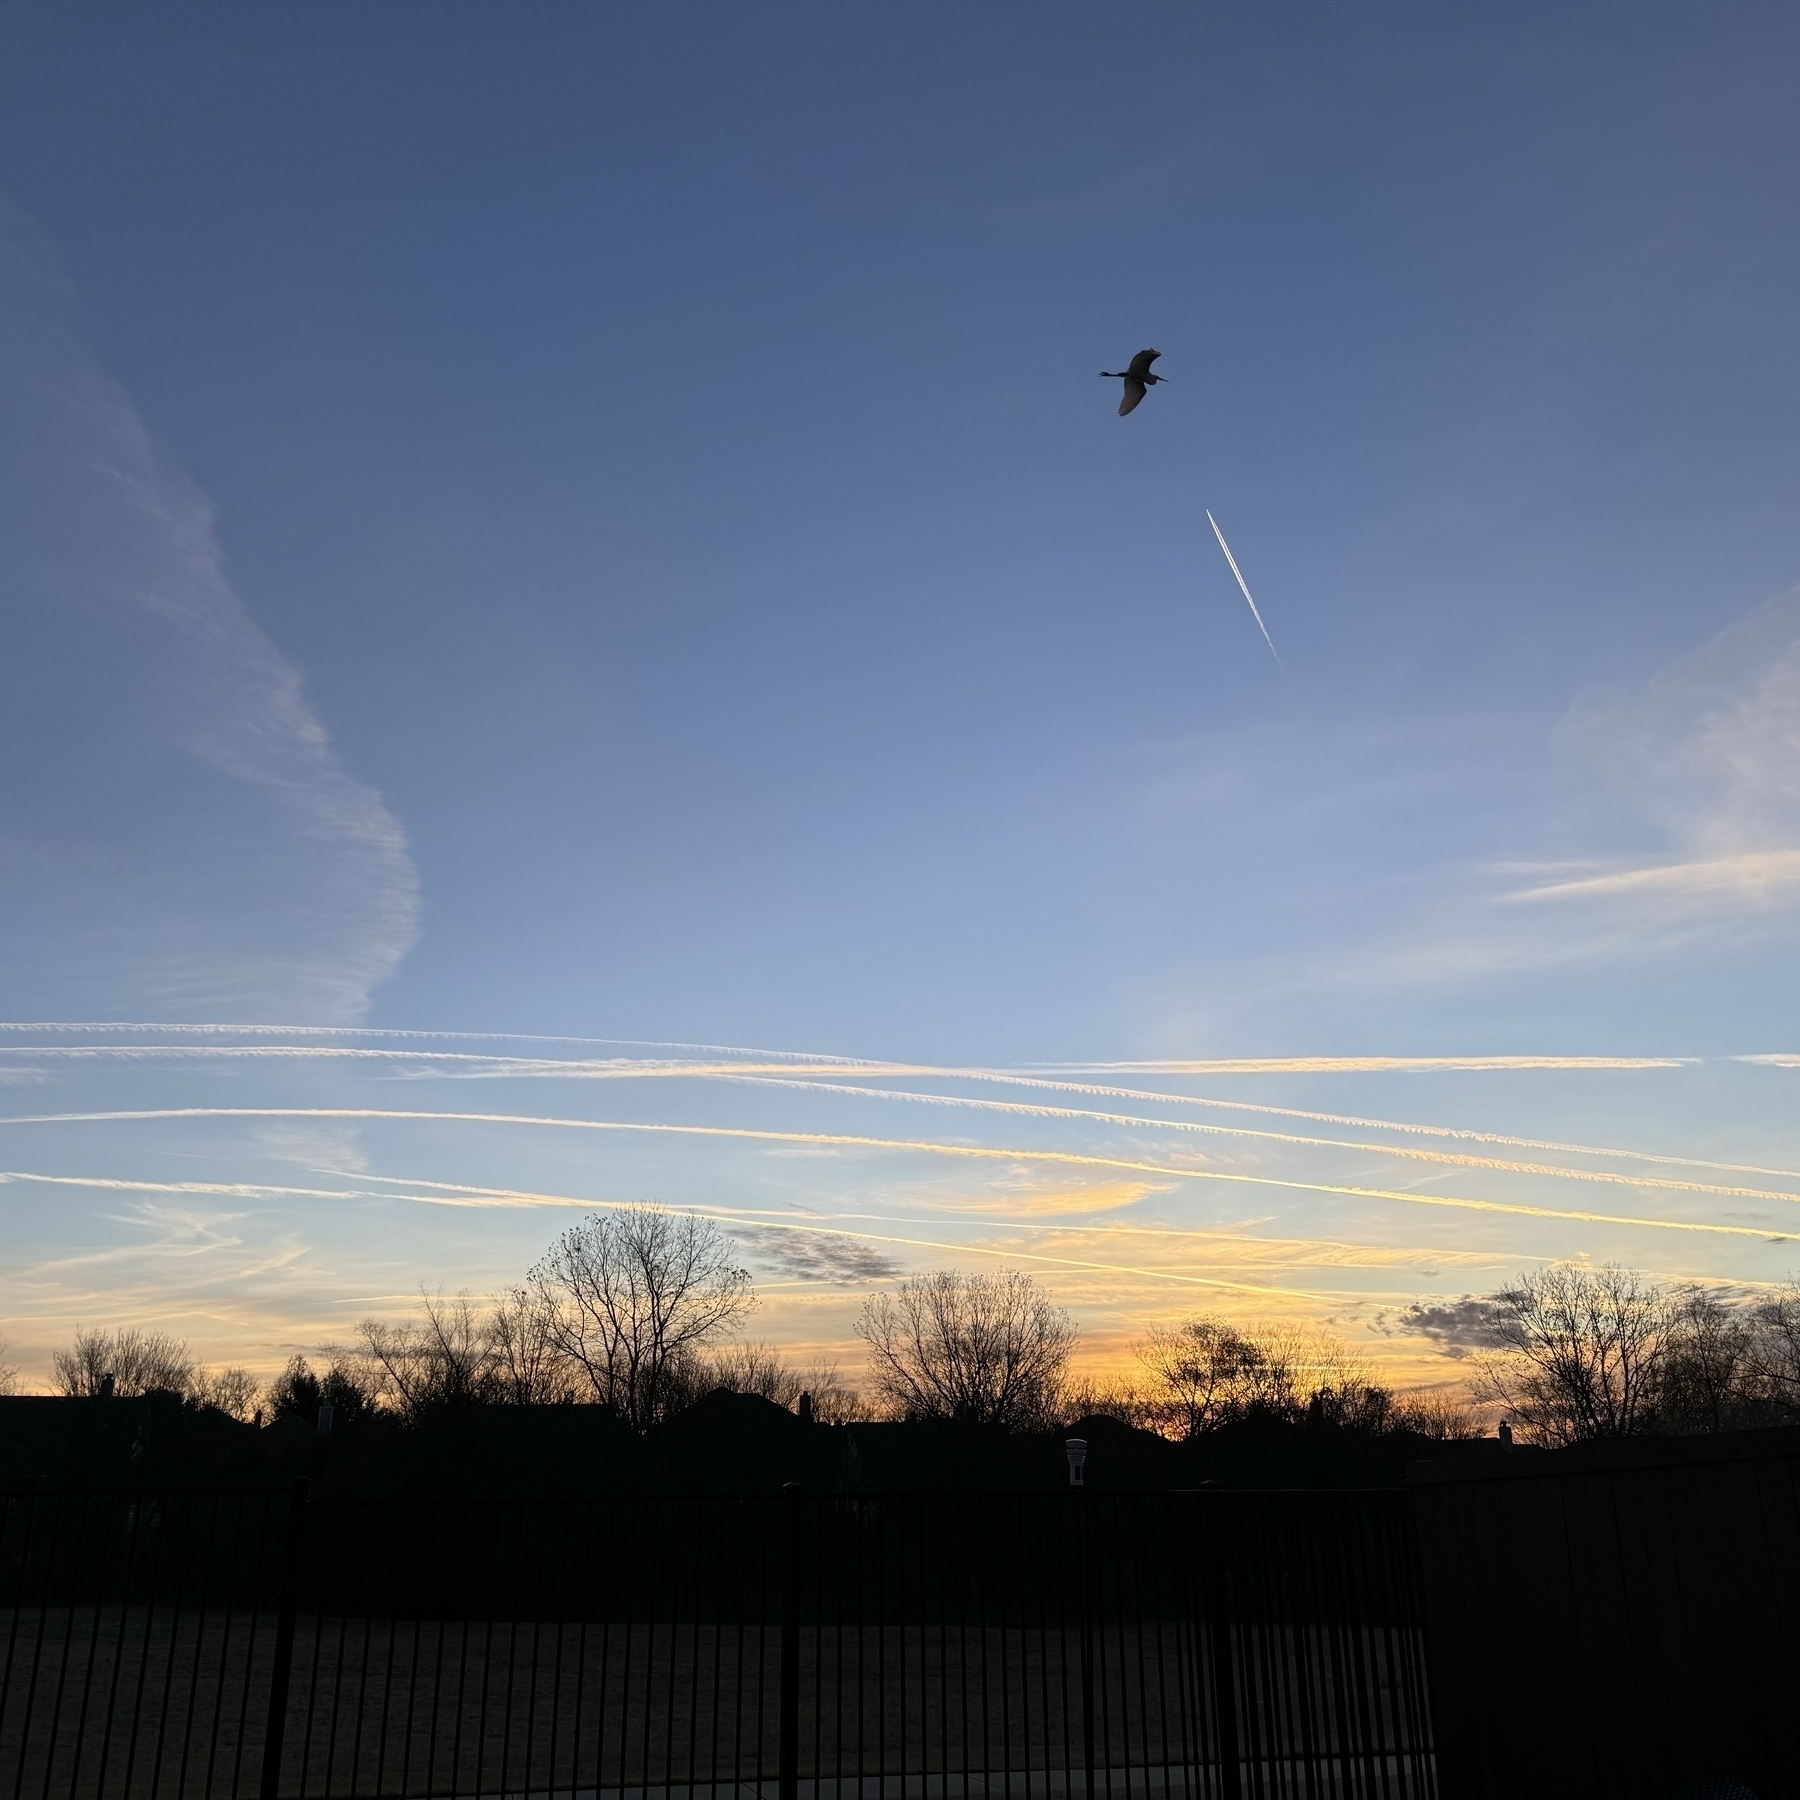 Sunrise on a sky streaked with contrails